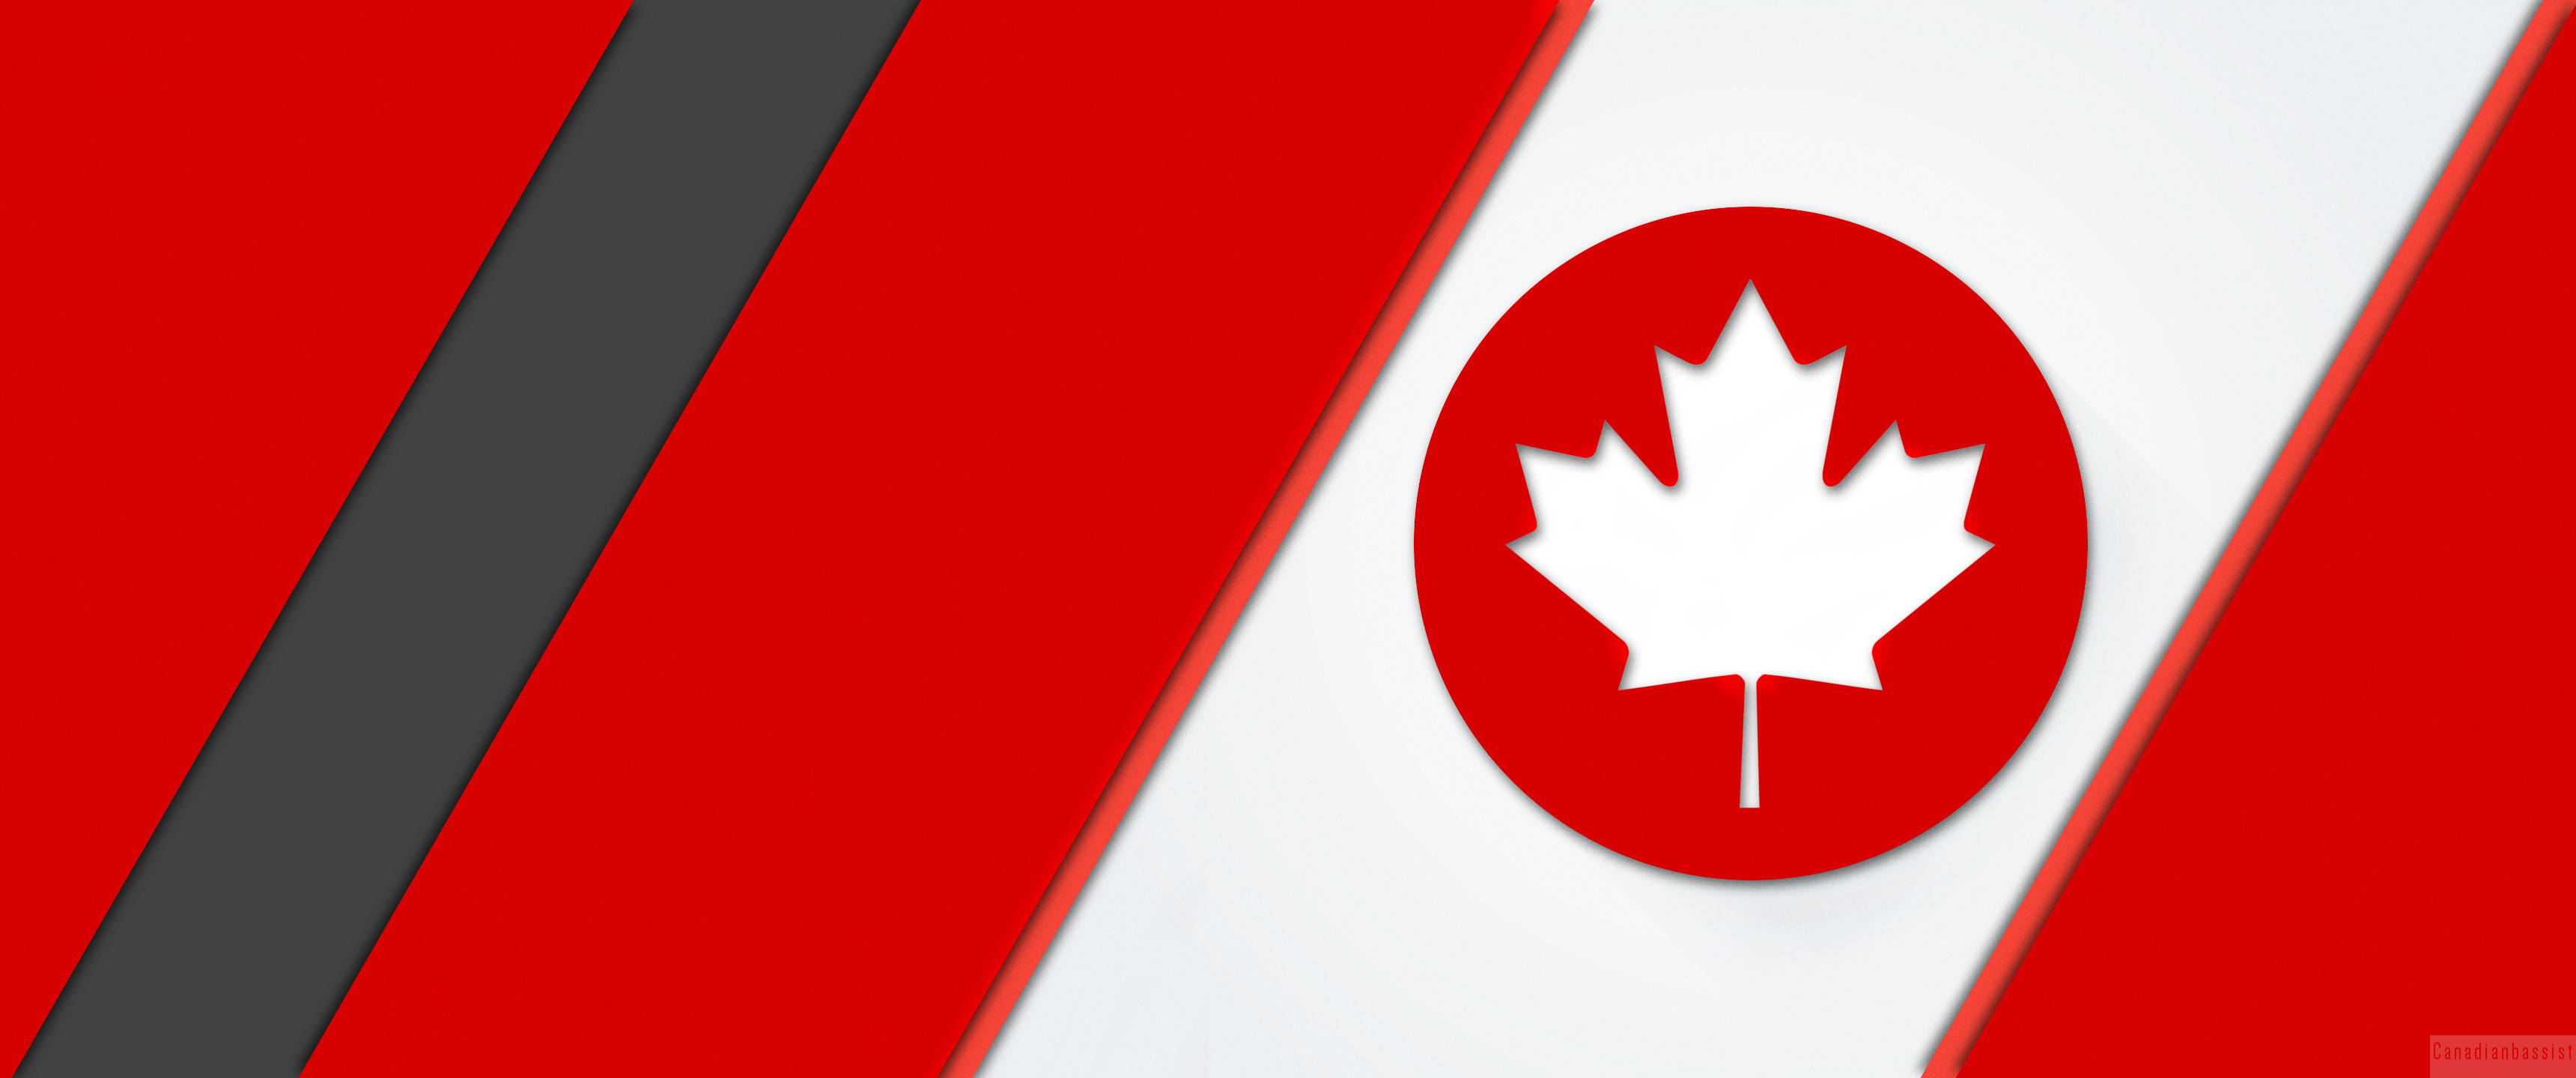 3440x1440 ... Canadianbassist Material Canadian wallpaper 21:9 (3440 x 1440) by  Canadianbassist